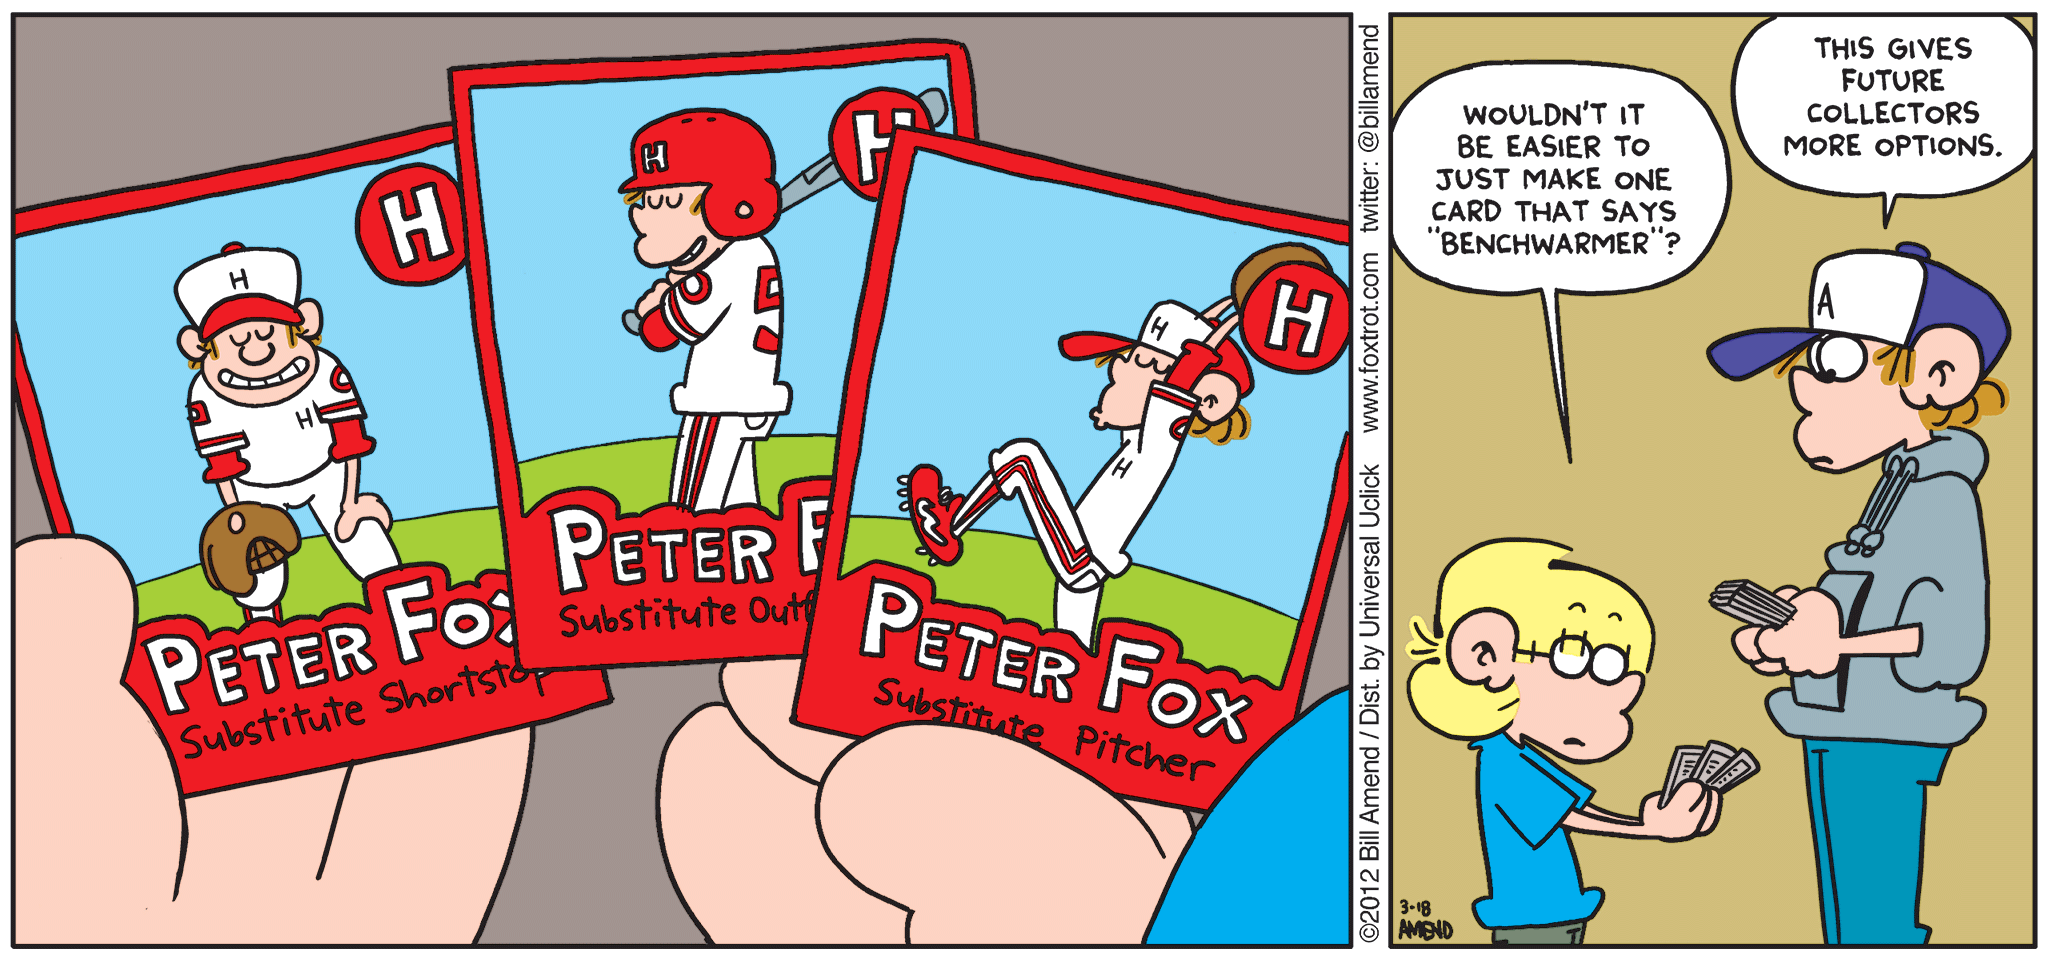 FoxTrot comic strip by Bill Amend - "What a Card" published March 18, 2012 - Jason: Wouldn't it be easier to just make one card that says "benchwarmer"? Peter: This gives future collectors more options.